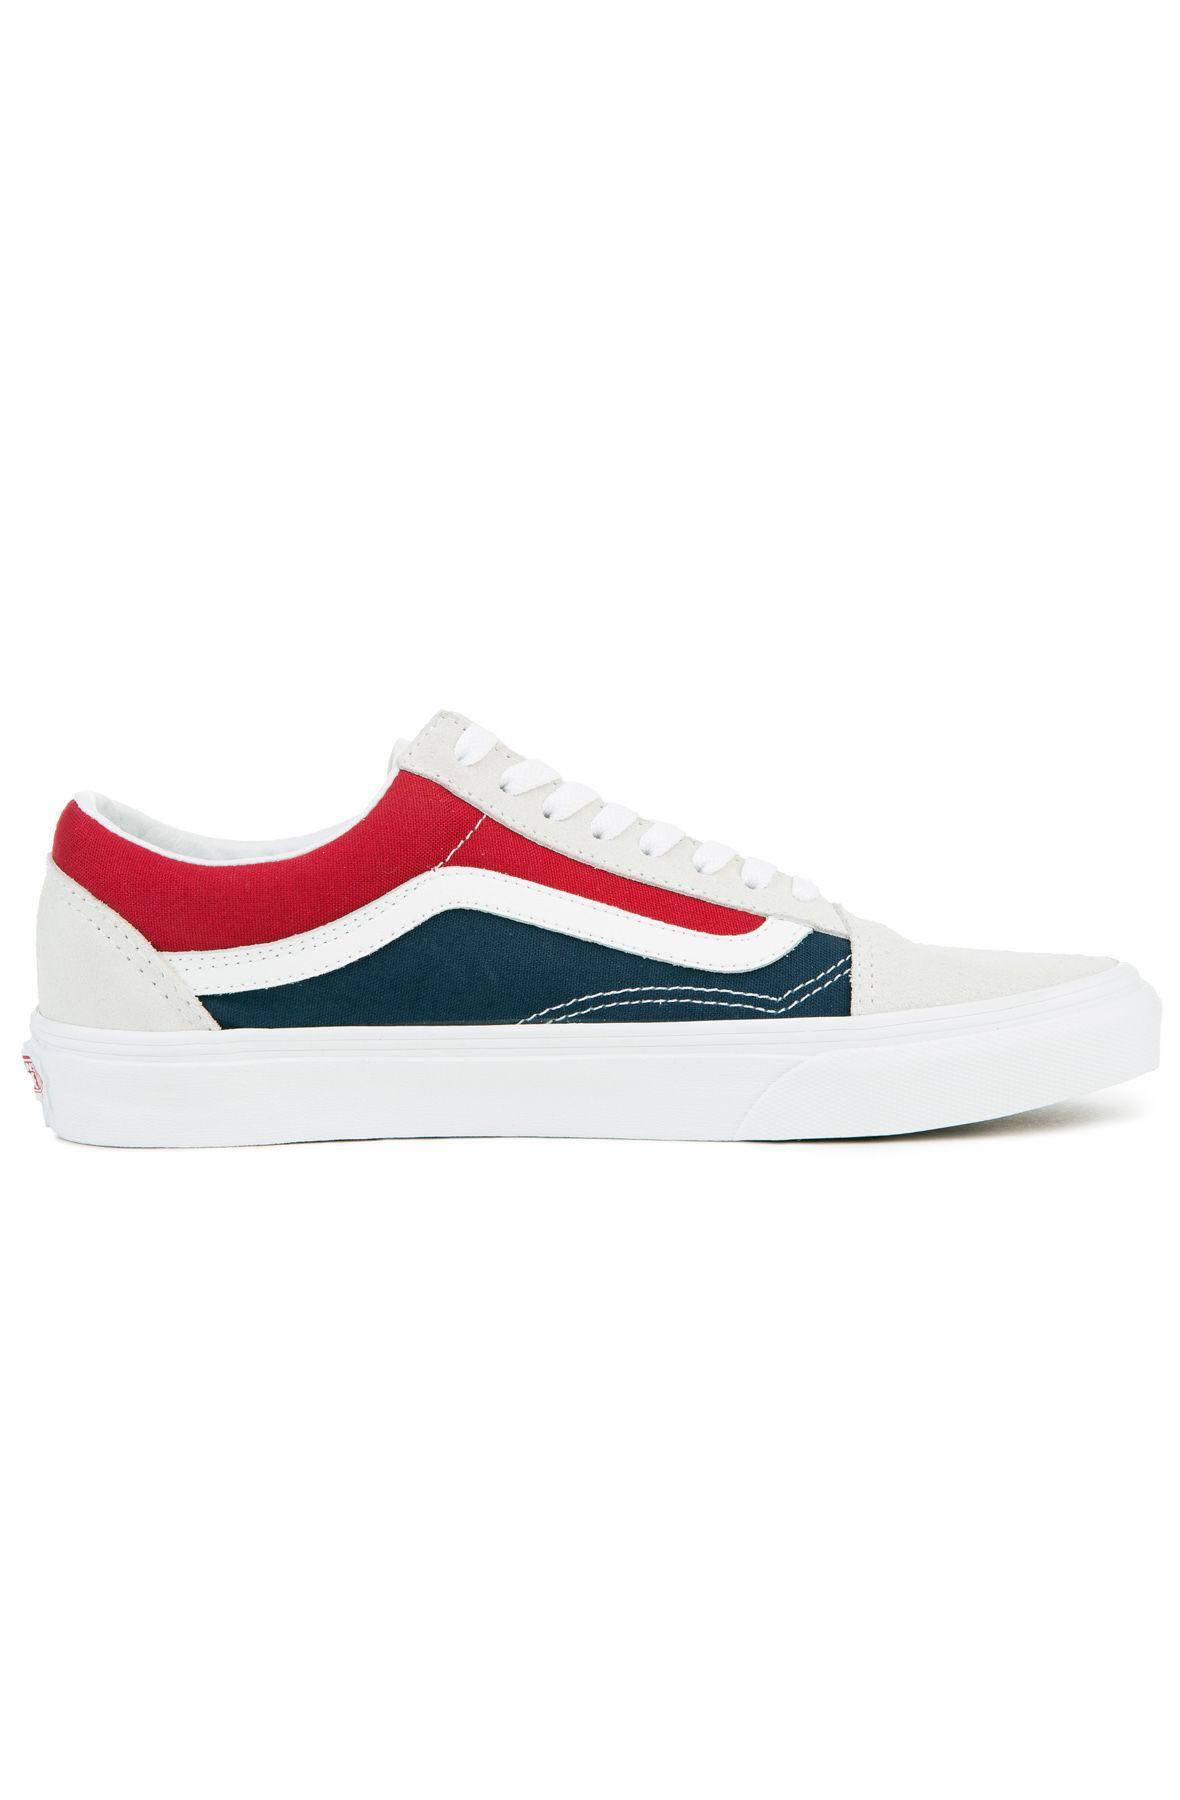 vans blue red and white